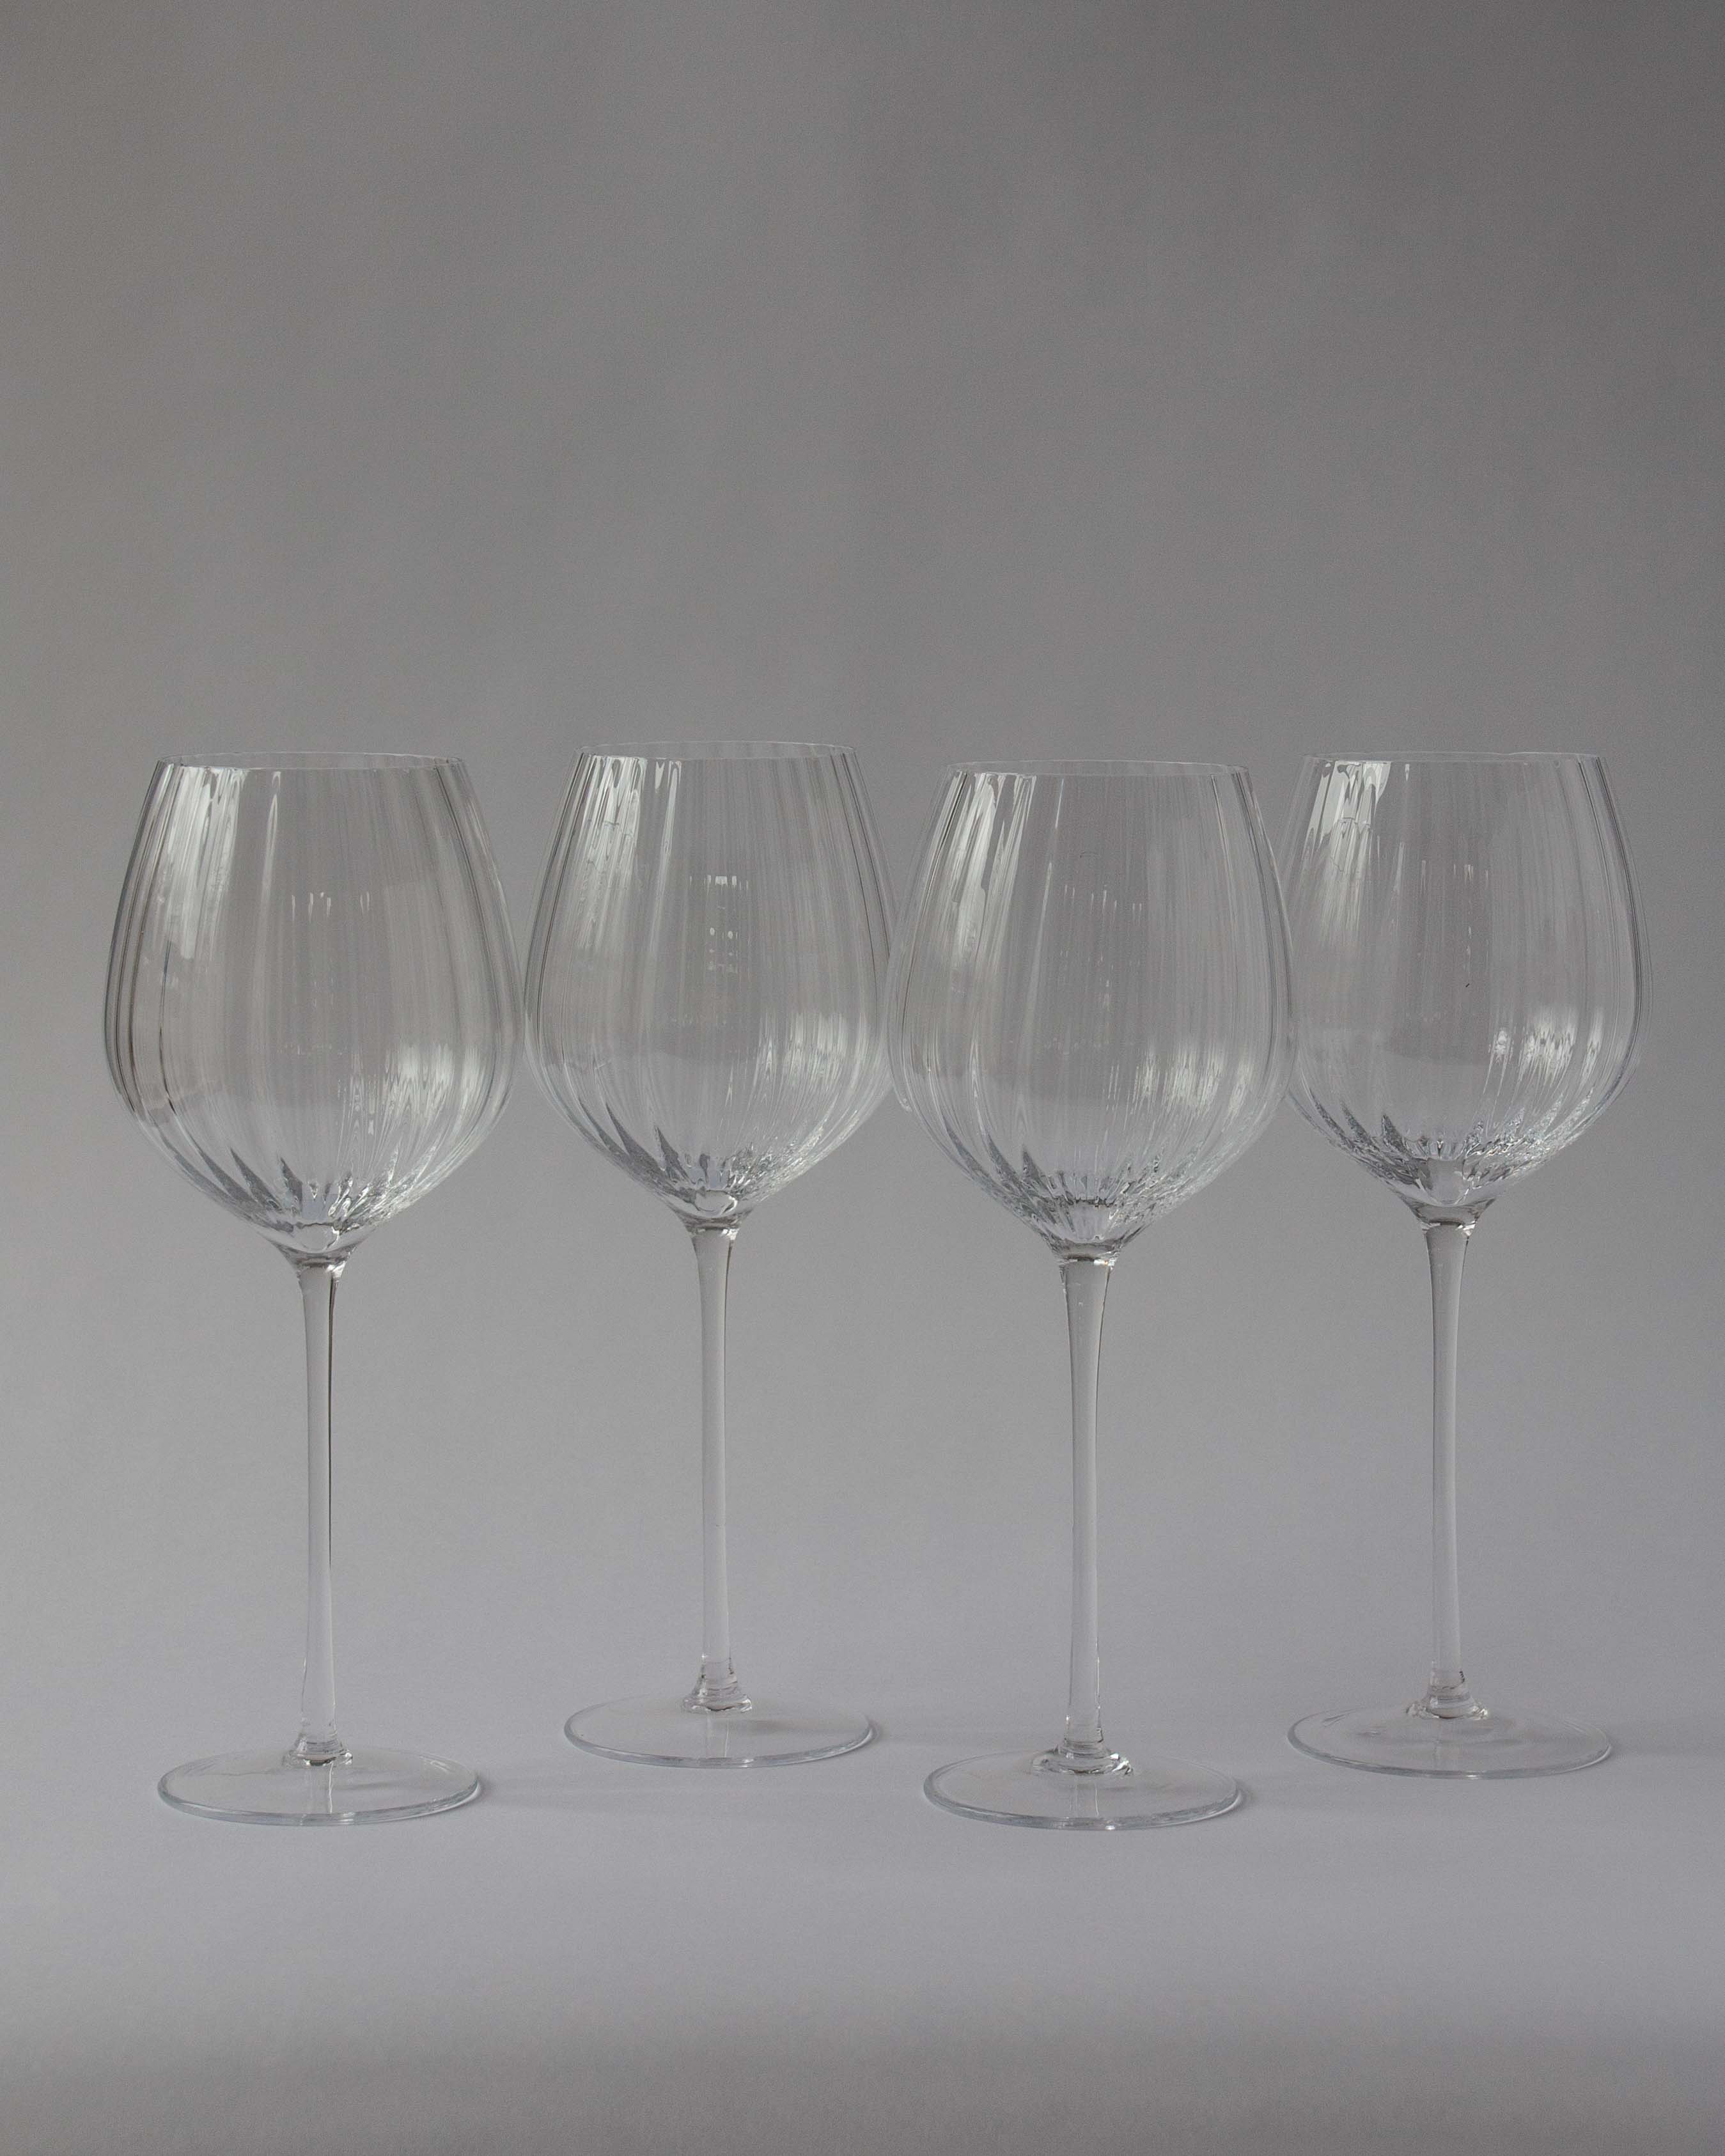 Aurelia Mouth Blown Red Wine Glass - Set of 4 | Anboise